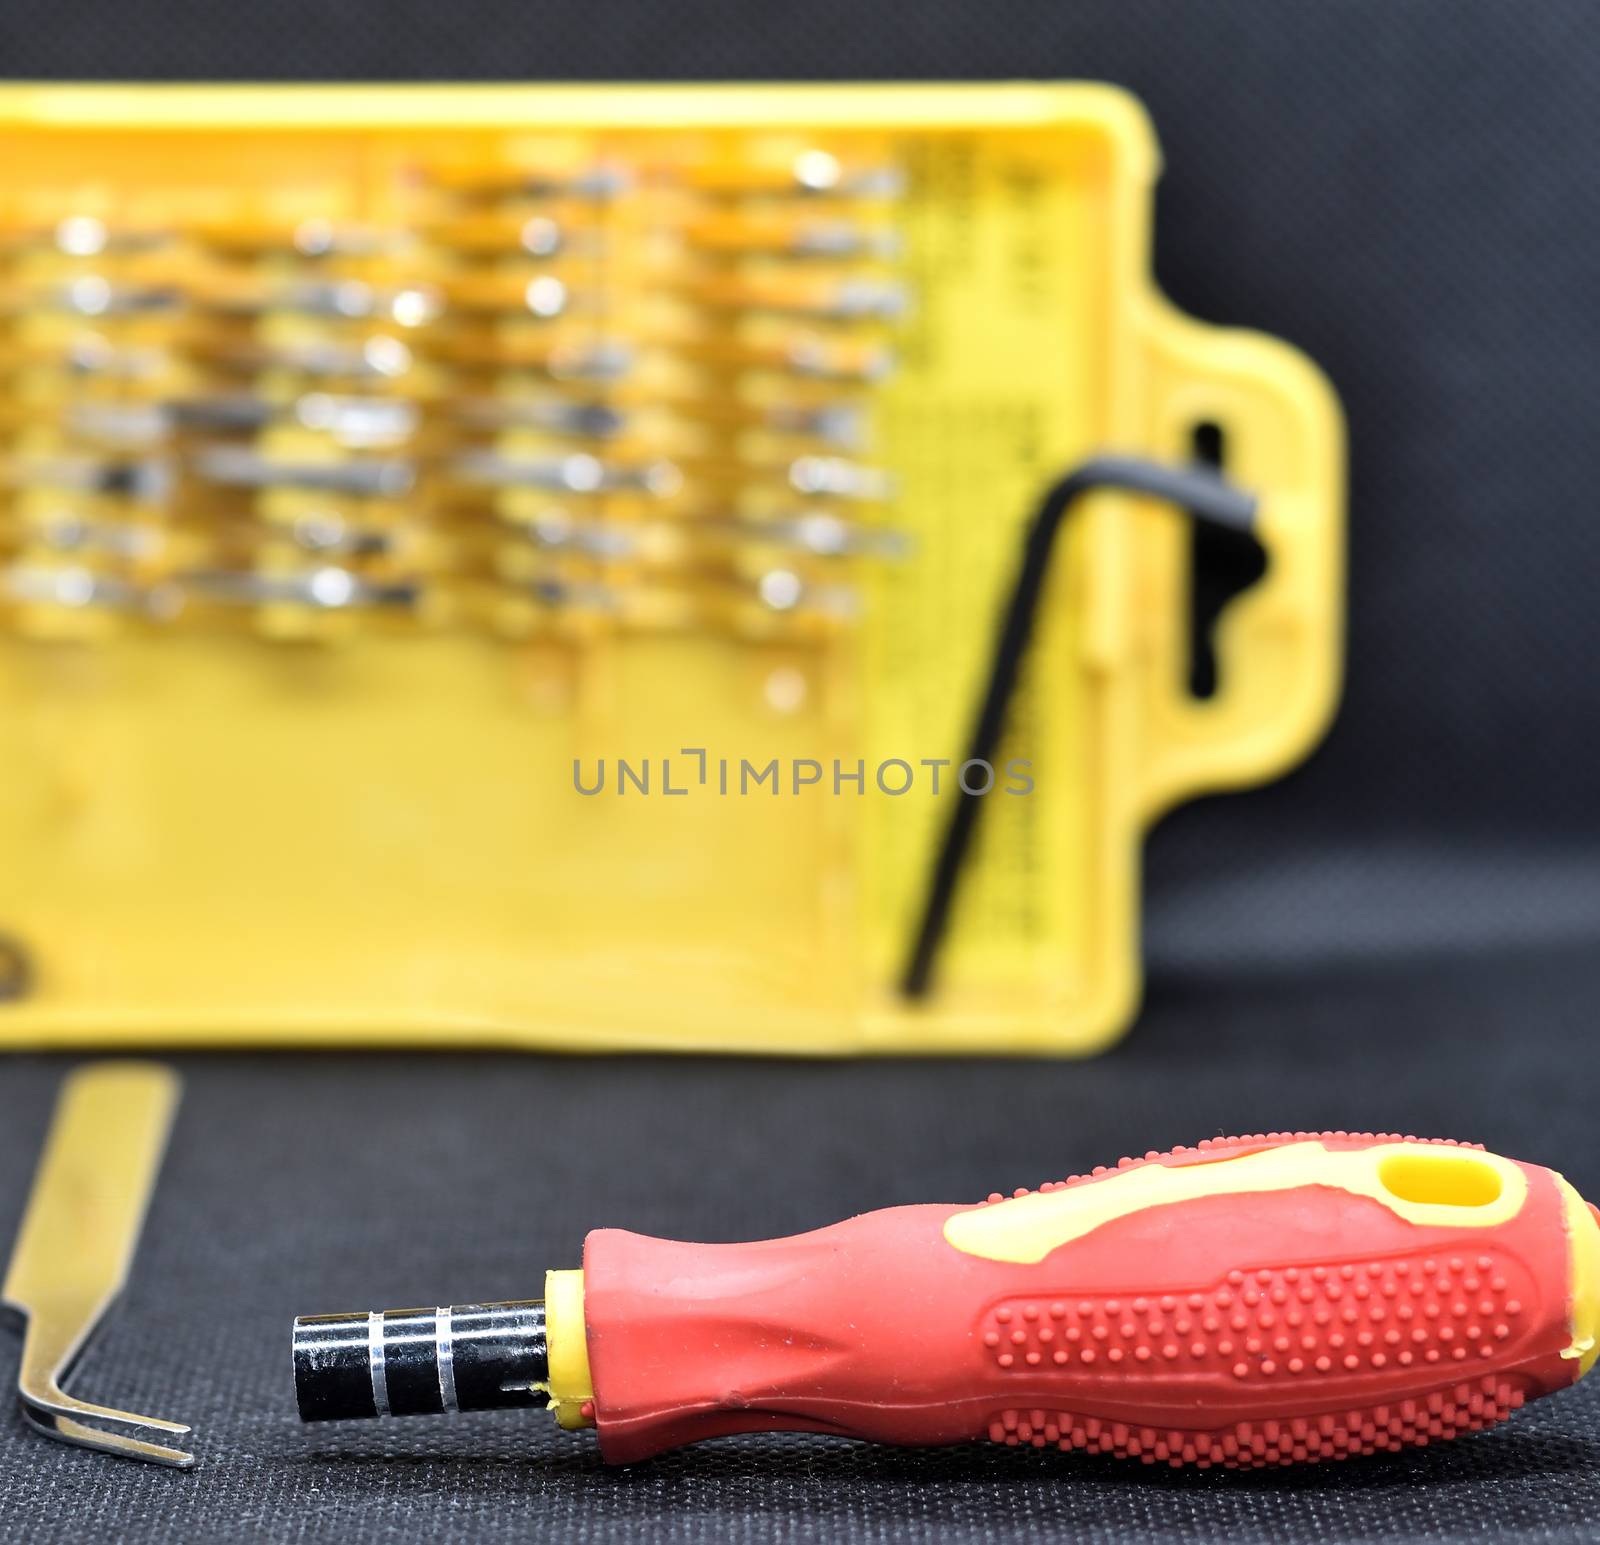 Multiple set of screwdrivers allows to open cover of any component or accessories easily and without damage